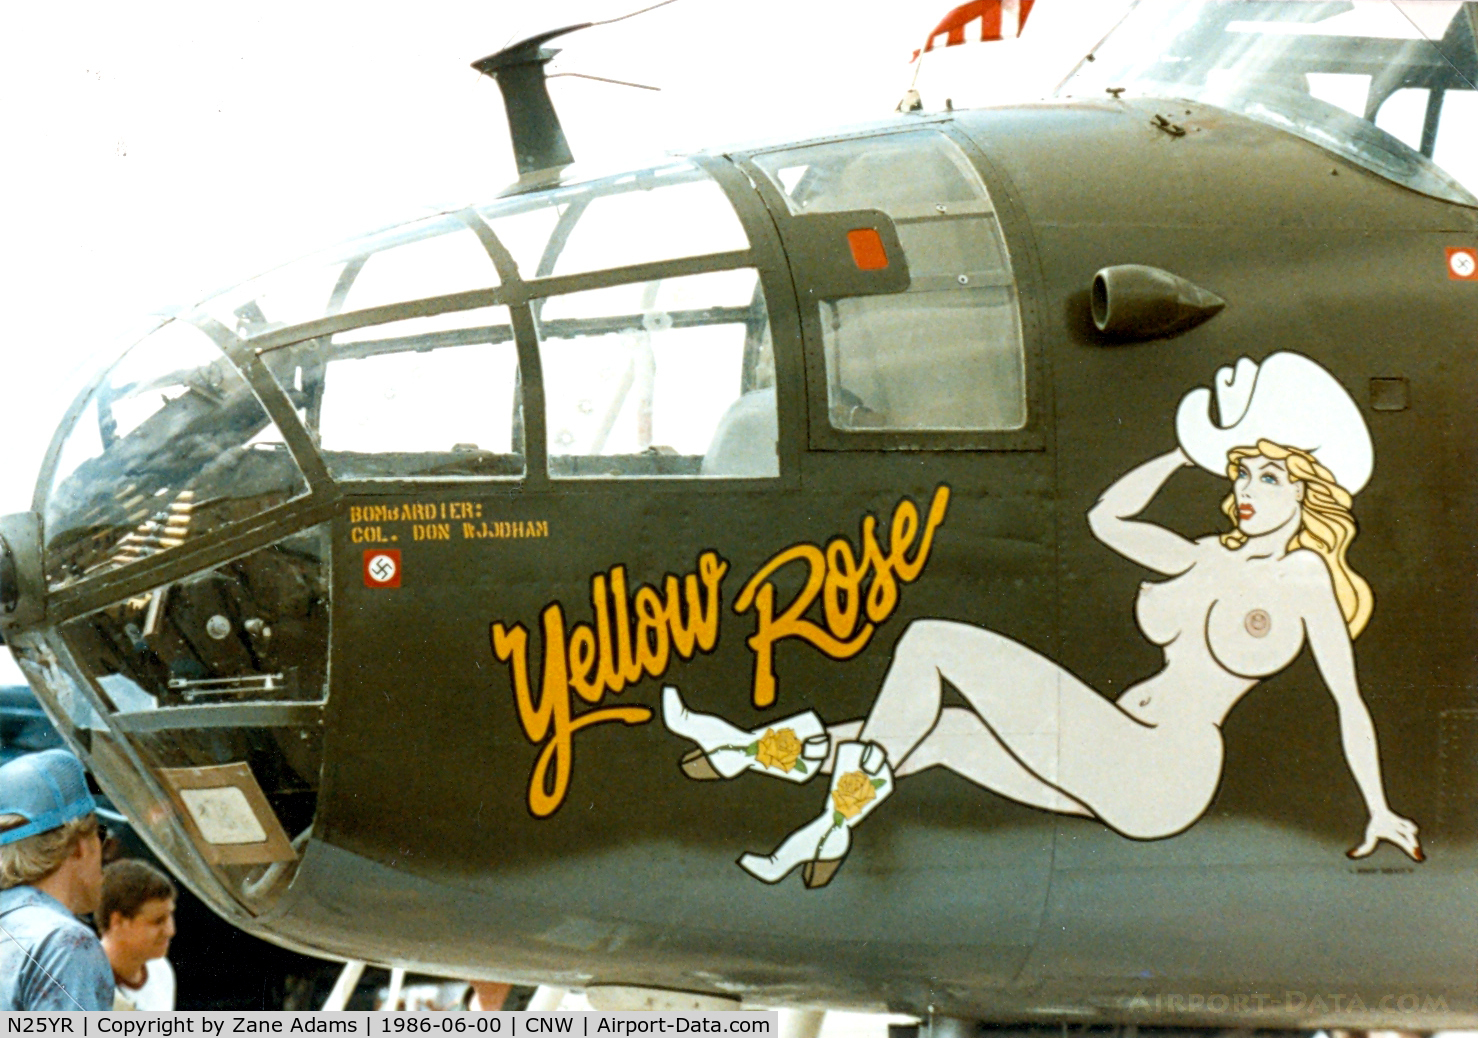 N25YR, 1943 North American TB-25N Mitchell C/N 108-34881, Texas Sesquicentennial Air Show 1986 - a good look at the now censored Yellow Rose nose art.